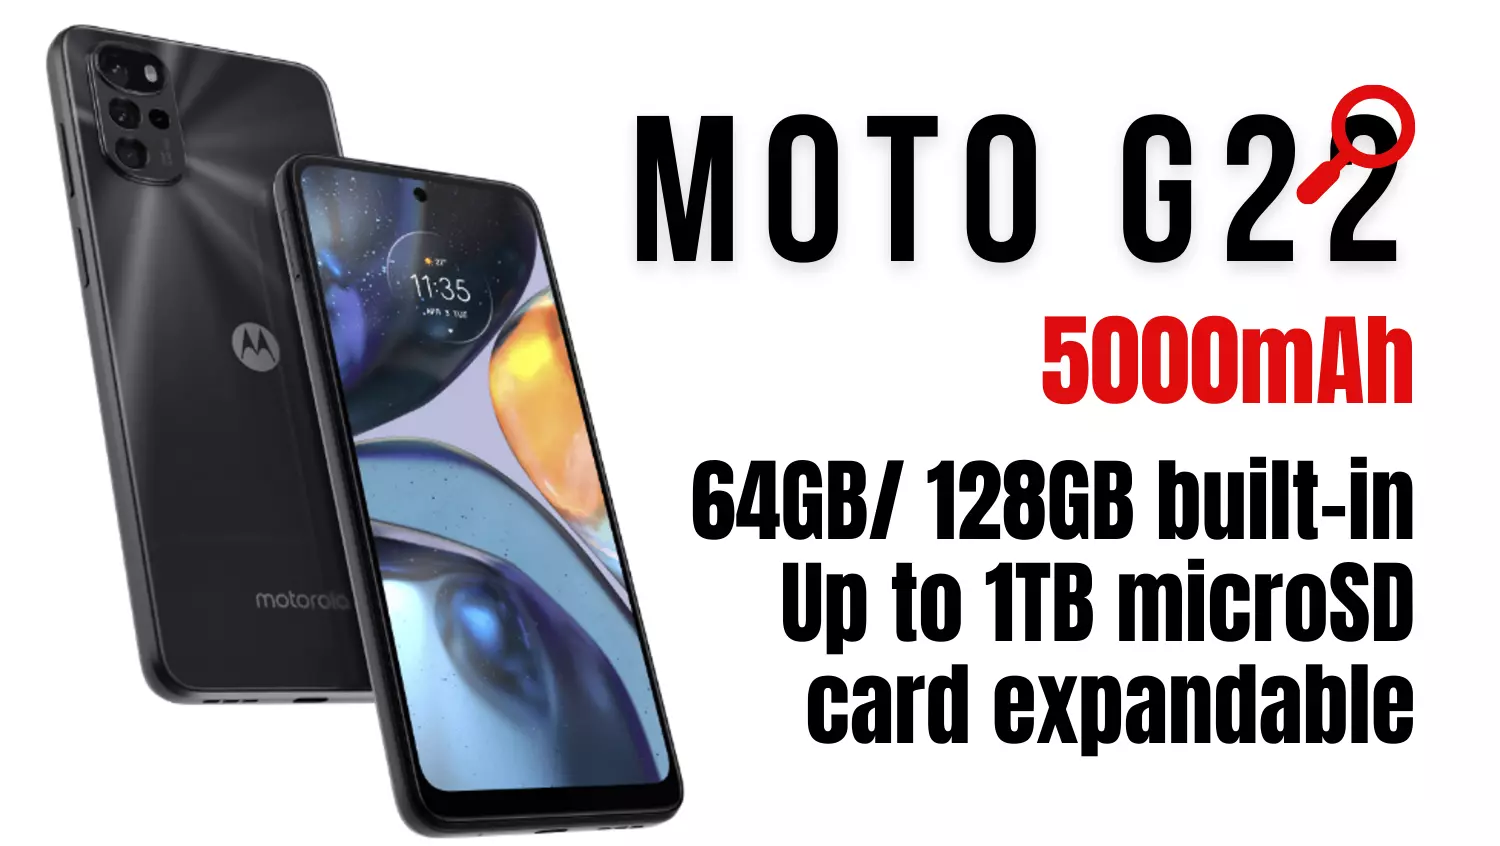 Moto G22: MediaTek Processor, 5,000mAh Battery, Camera, Check everything About This New Budget SmartphoneMoto G22: MediaTek Processor, 5,000mAh Battery, Camera, Check everything About This New Budget Smartphone